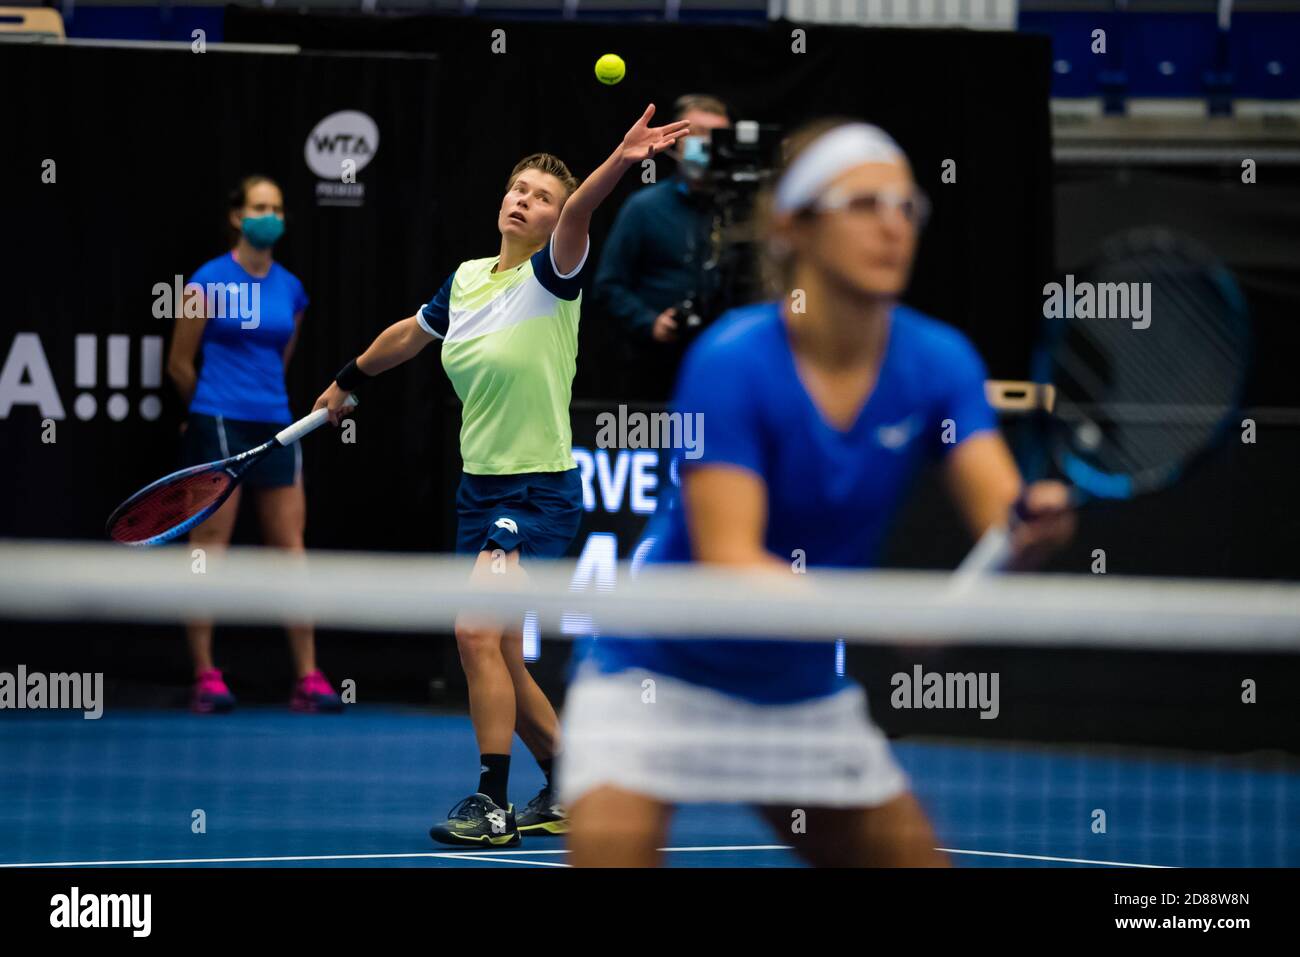 Demi Schuurs of the Netherlands and Kirsten Flipkens of Belgium in action during the doubles semifinal at the 2020 J&T Banka Ostrava Open WTA Premie C Stock Photo